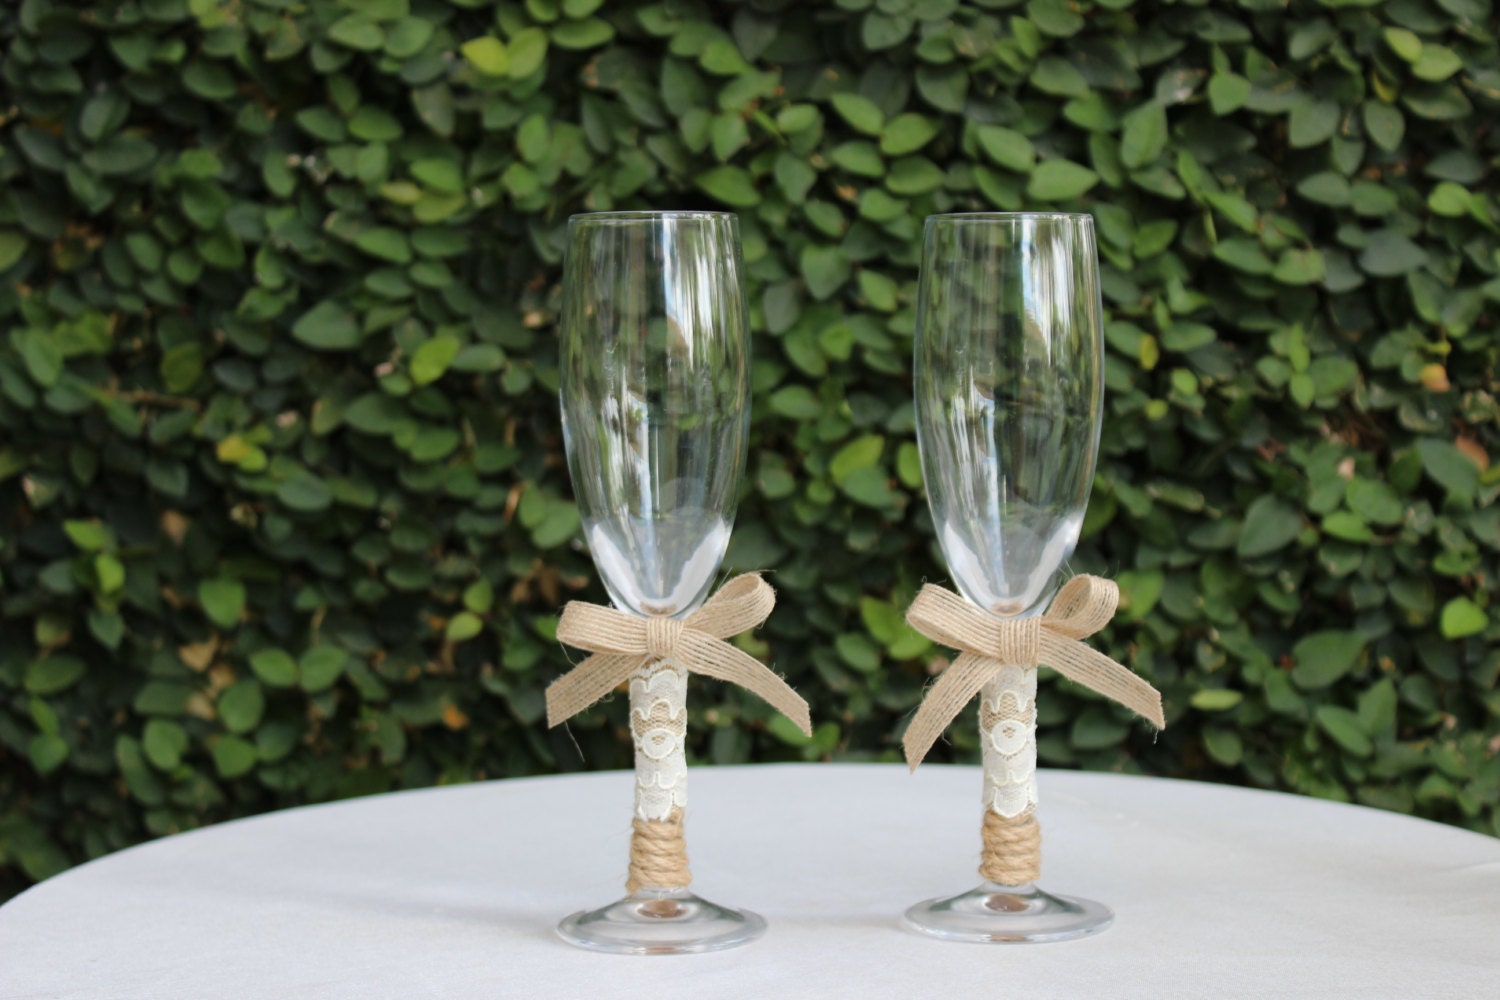 Rustic Wedding Glasses / Champagne Toast Glasses / Bride and Groom Champagne Glasses